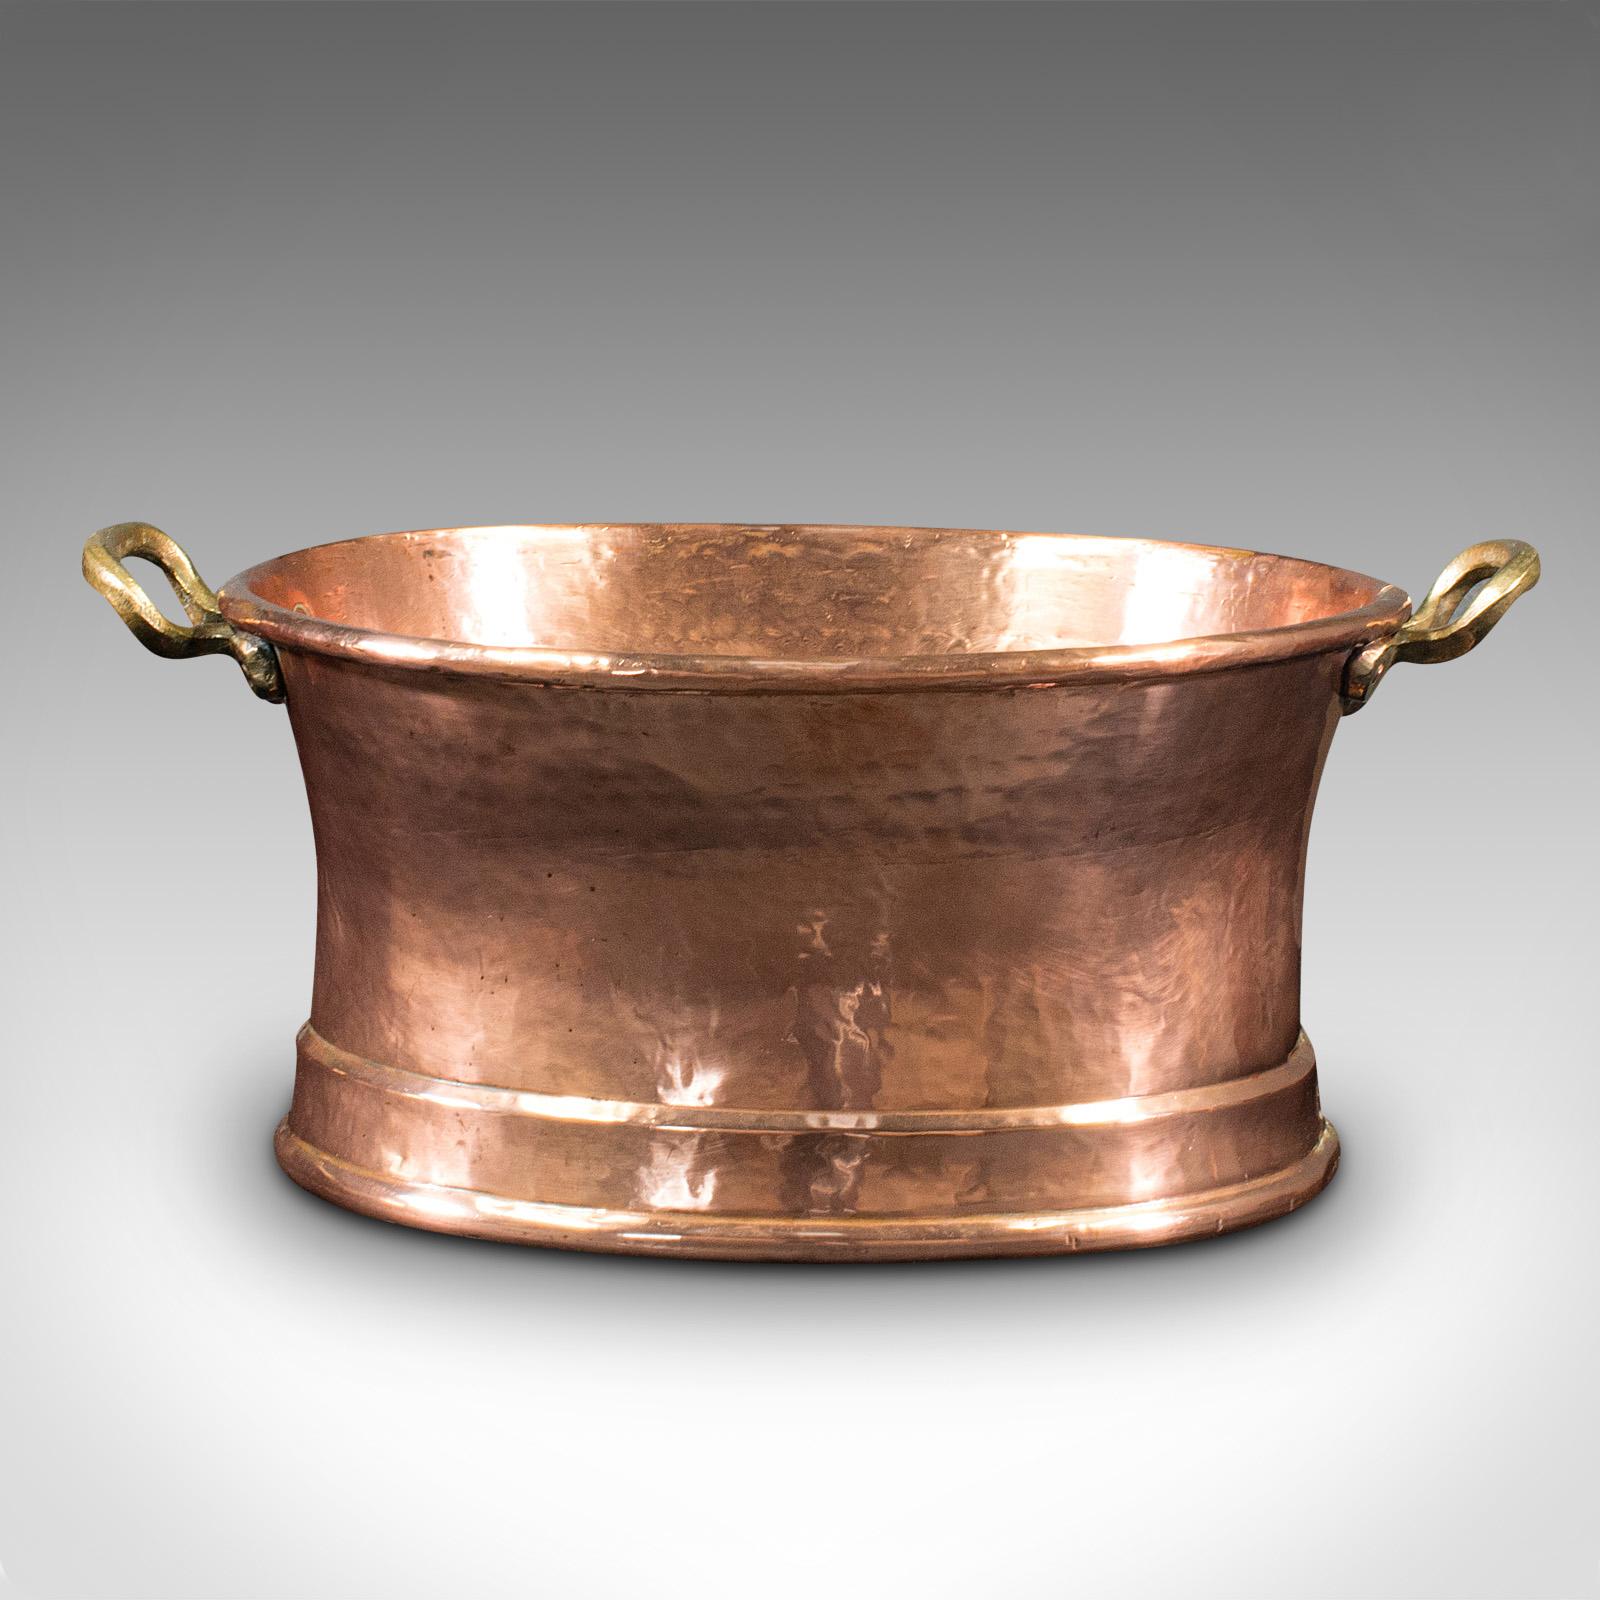 This is an antique pheasant roasting pan. An English, hand-beaten copper decorative pot, dating to the Georgian period, circa 1800.

Whilst used in period, the unlined nature of this copper pan is suitable for display use only.

Wonderfully